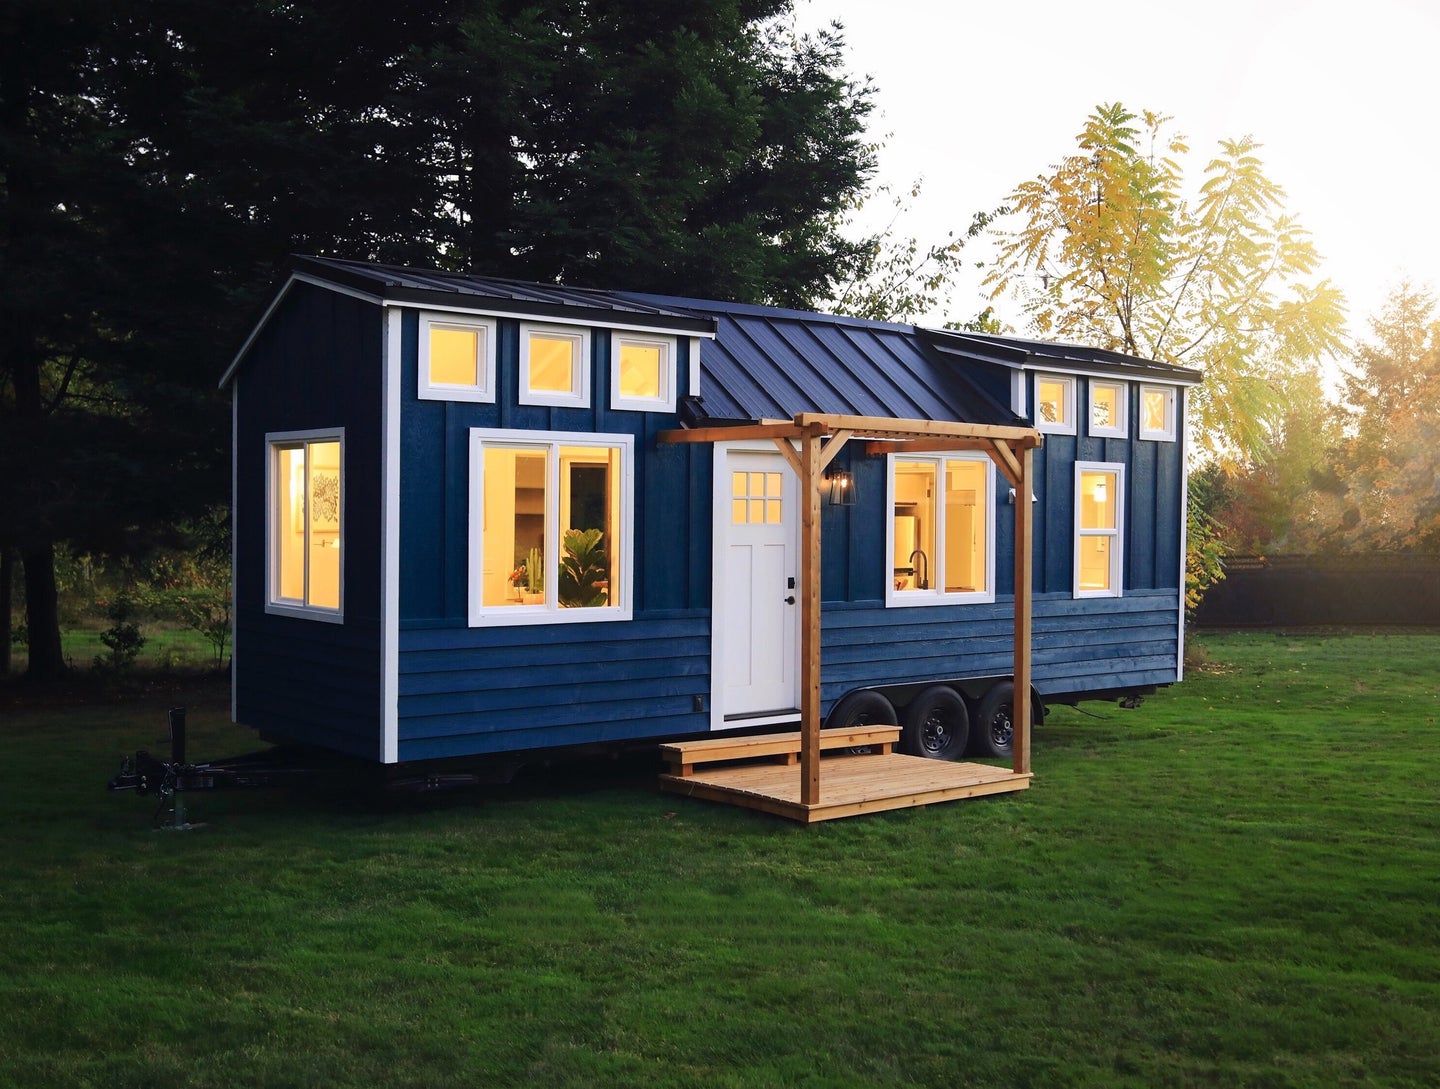 This Impressive Tiny House Interior Design Will Teach You How to Make Small  Spaces Feel Larger